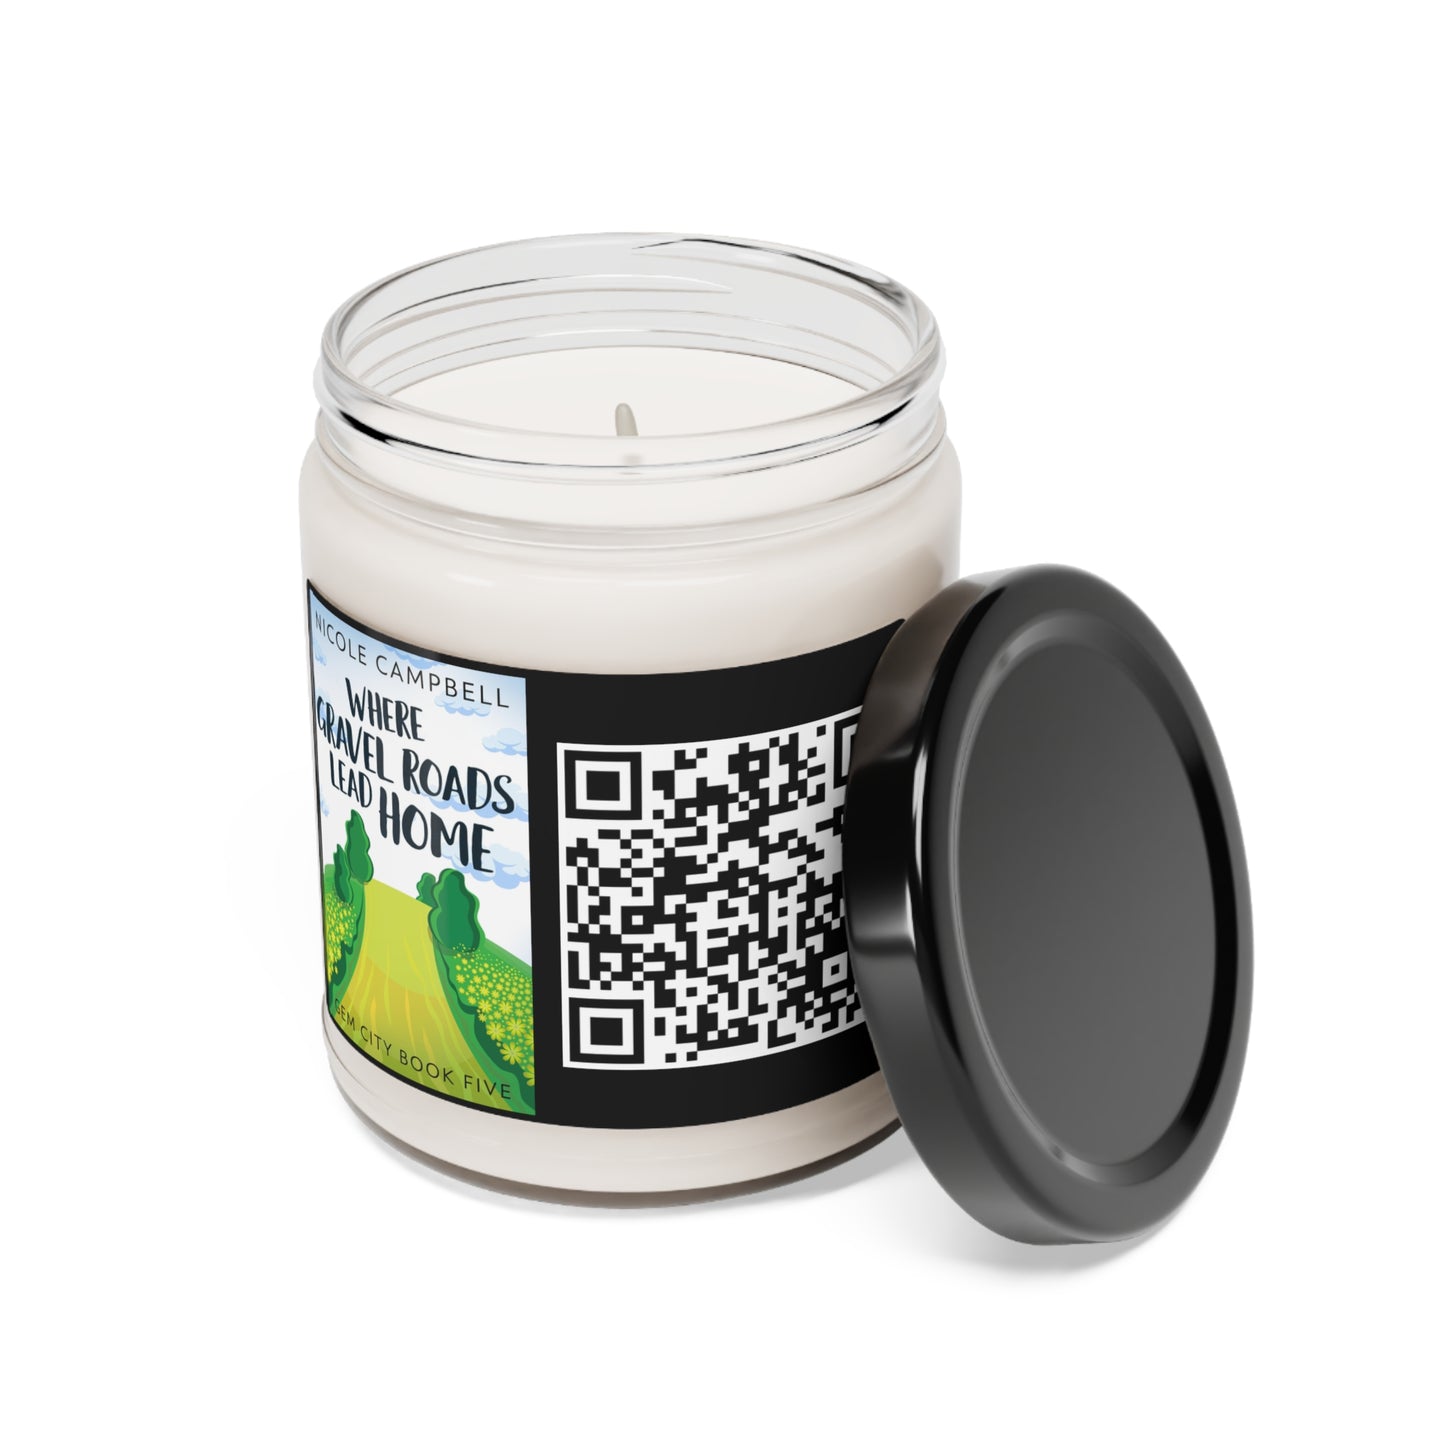 Where Gravel Roads Lead Home - Scented Soy Candle